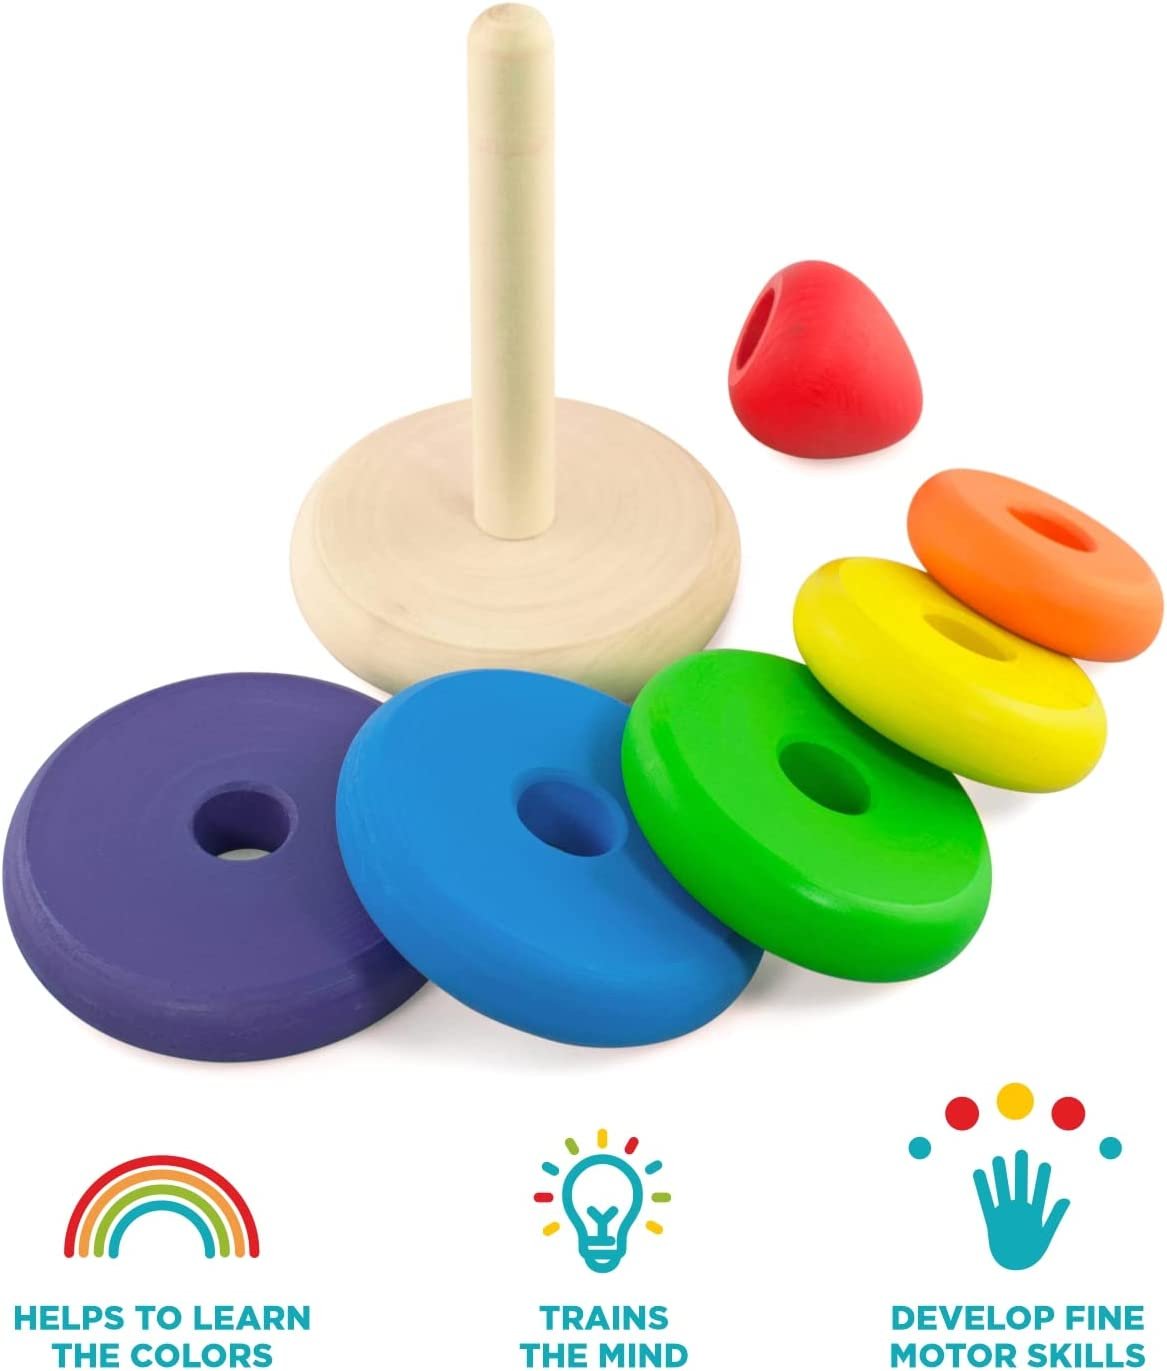 Ulanik Rings Stacker Montessori Toy Wooden Stacking Rings Rainbow Stacker Game 5 pcs 17 cm Age 1+ Preschool Learning Education